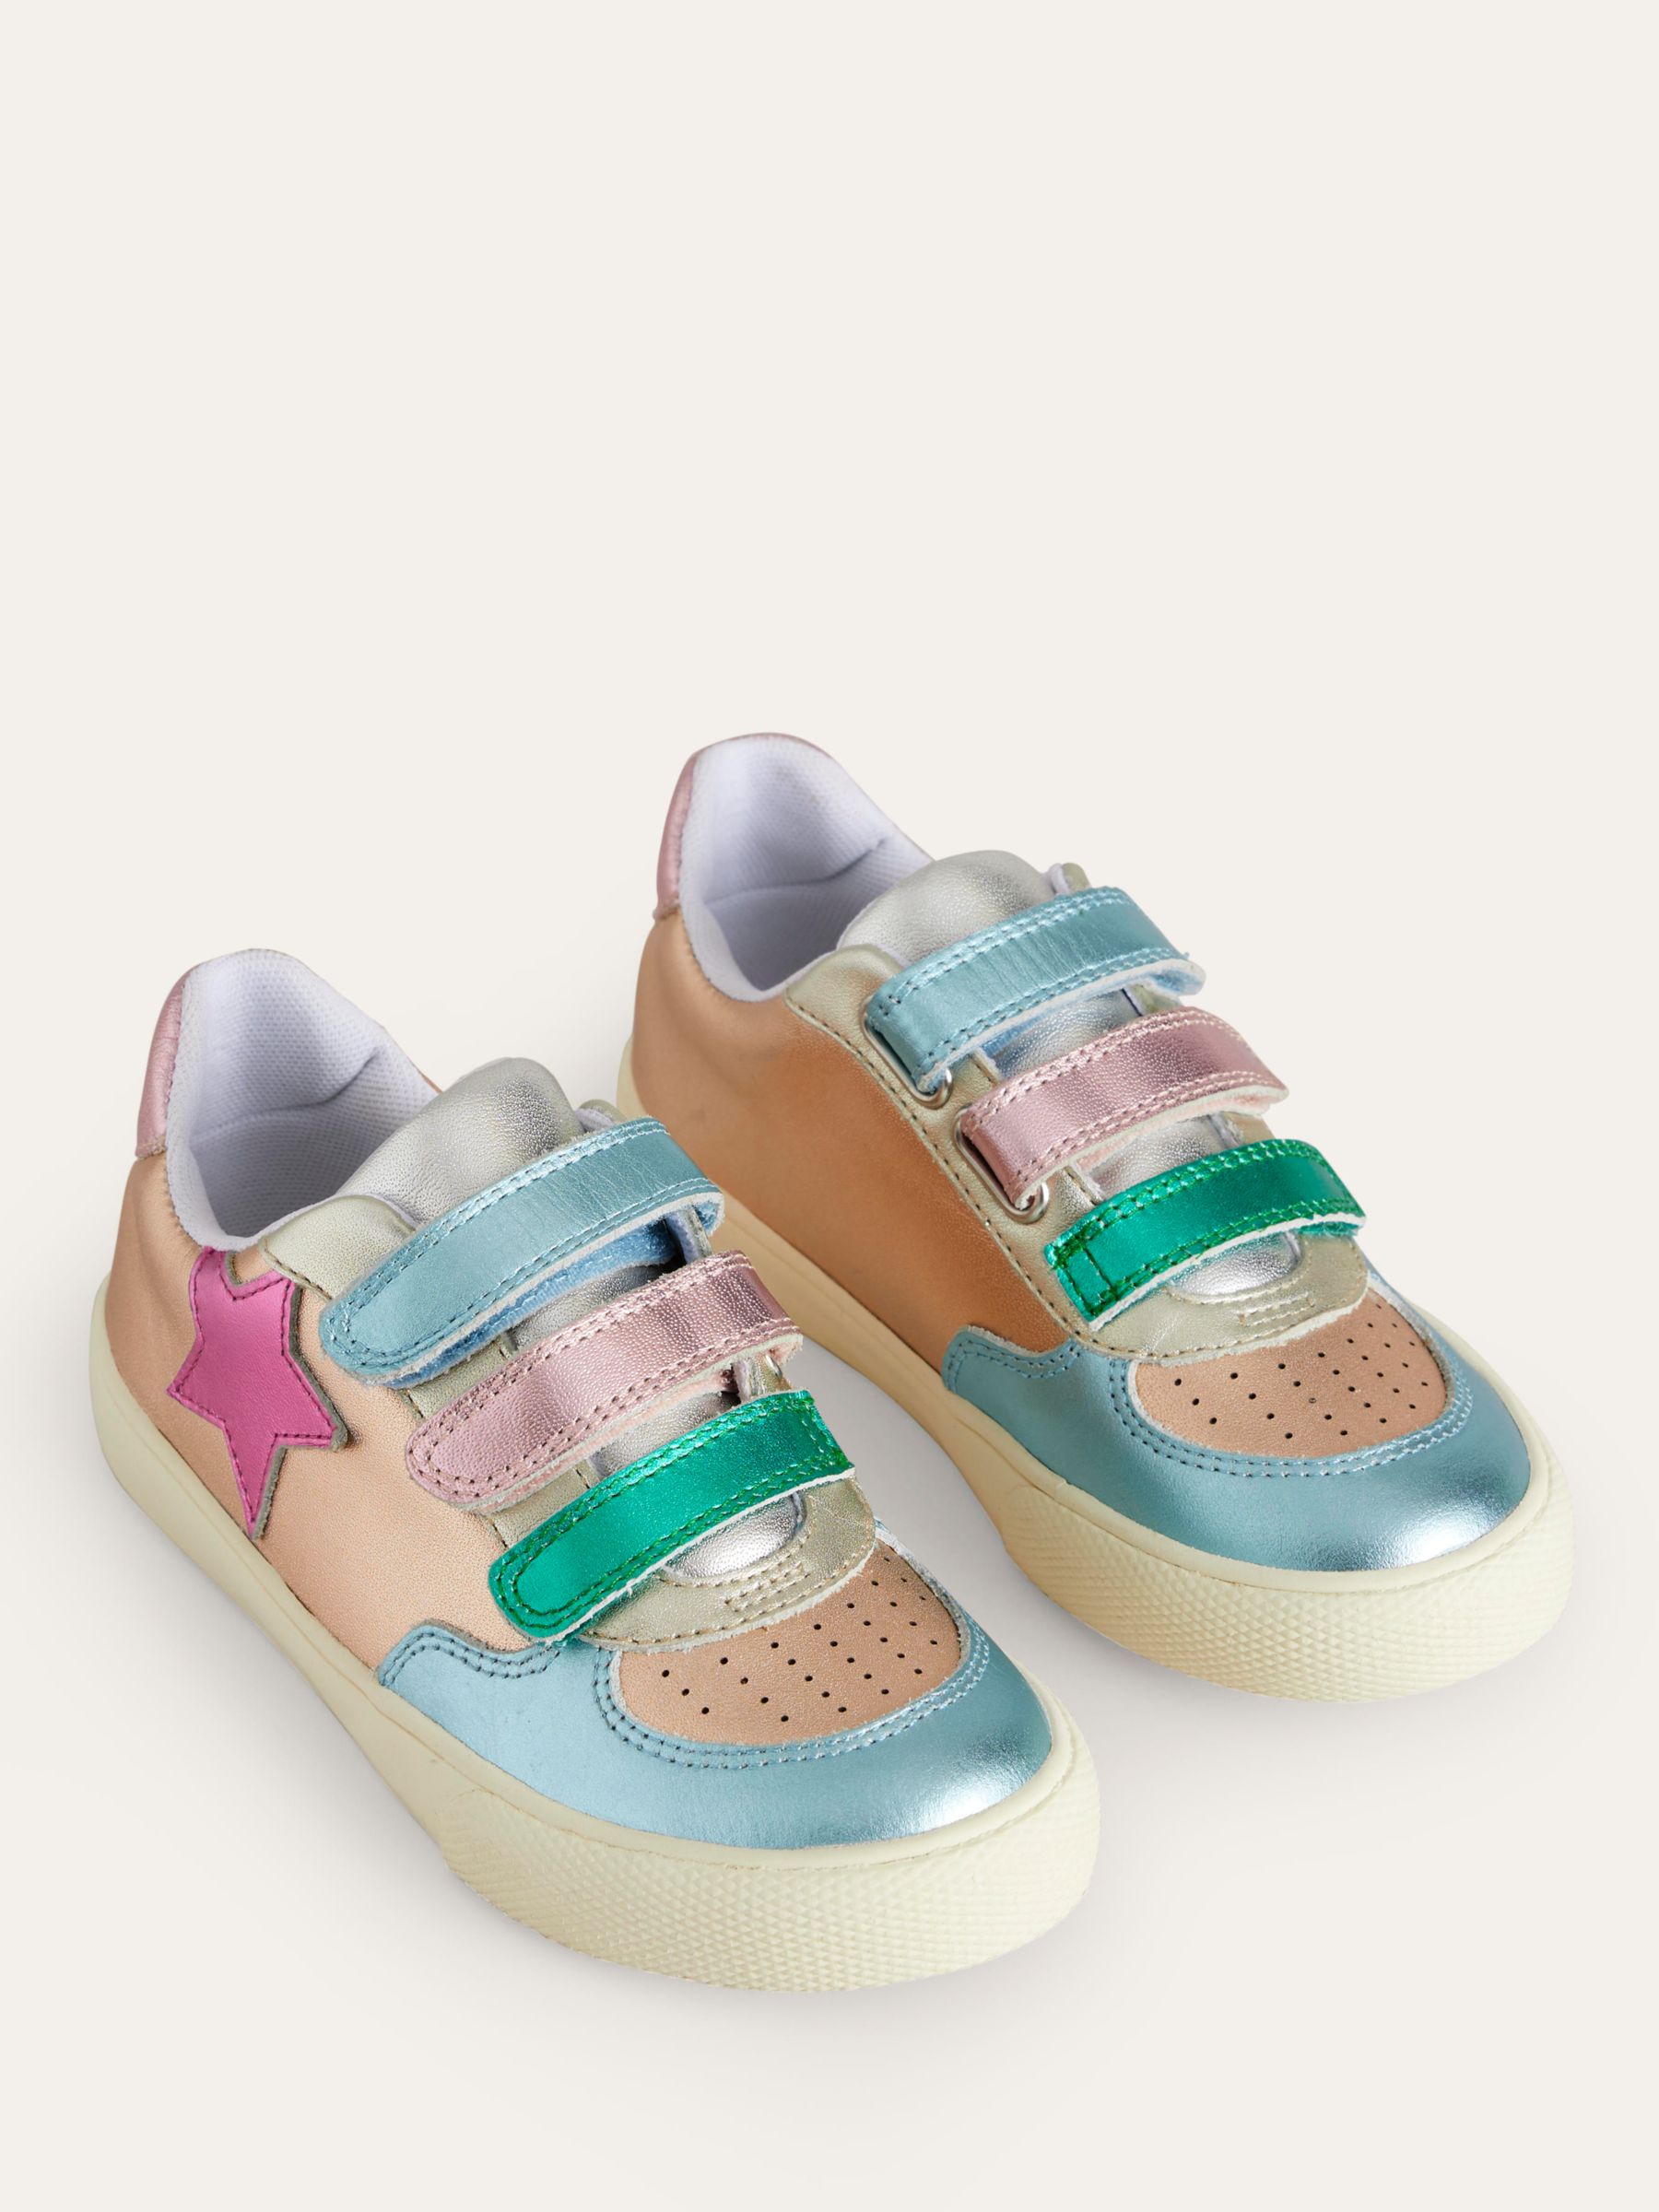 Buy Mini Boden Kids' Leather Low Top Metallic Star Trainers, Multi Online at johnlewis.com